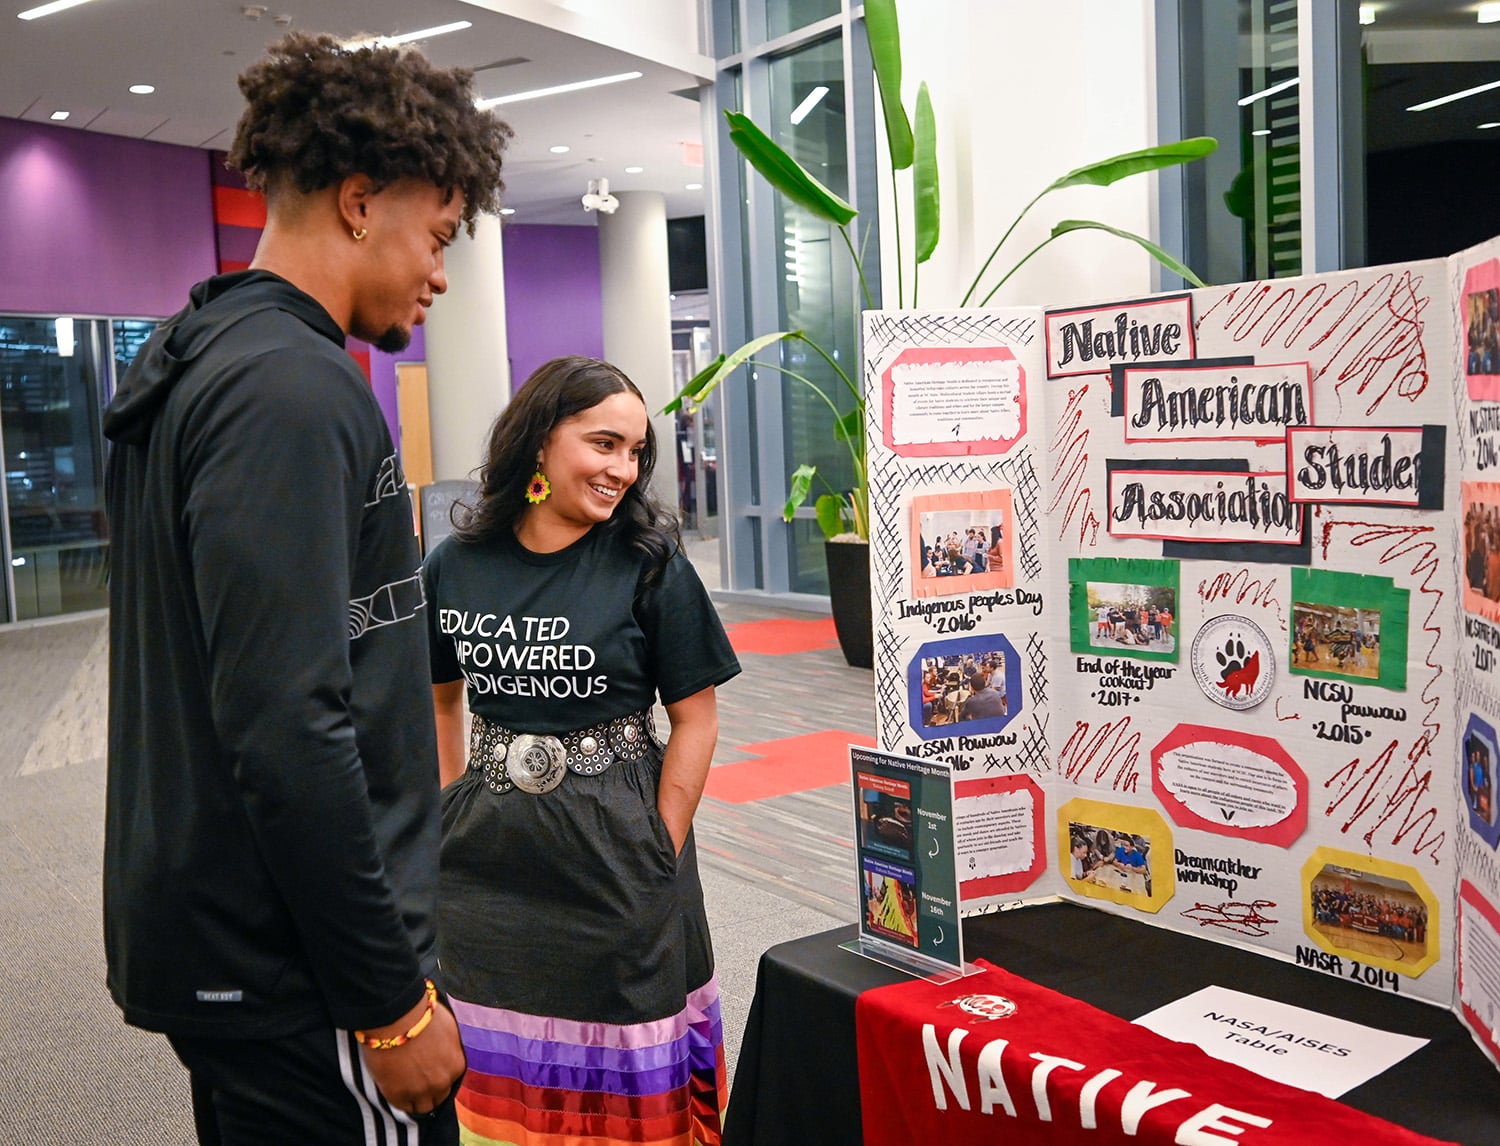 Two students stand together smiling and looking at a poster from the Native American Student Association.